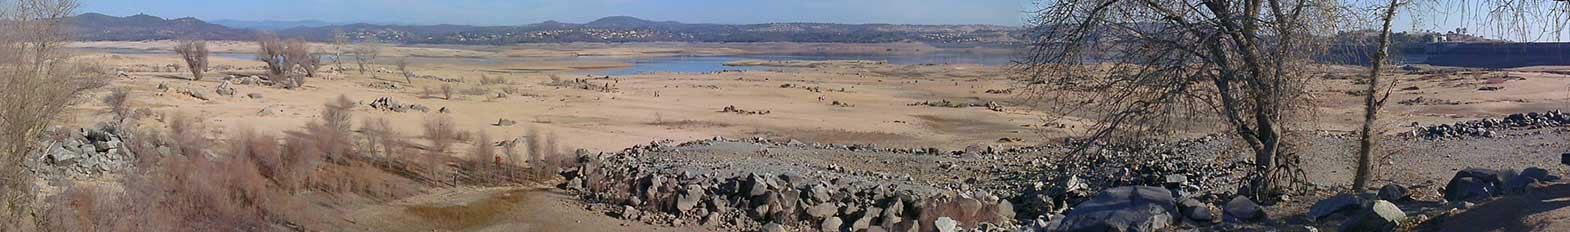 View of Folsom Lake form Beals Point at the east end of the parking area.. Photo taken on January 25, 2014 by David Pratt of the U.S. Geological Survey.